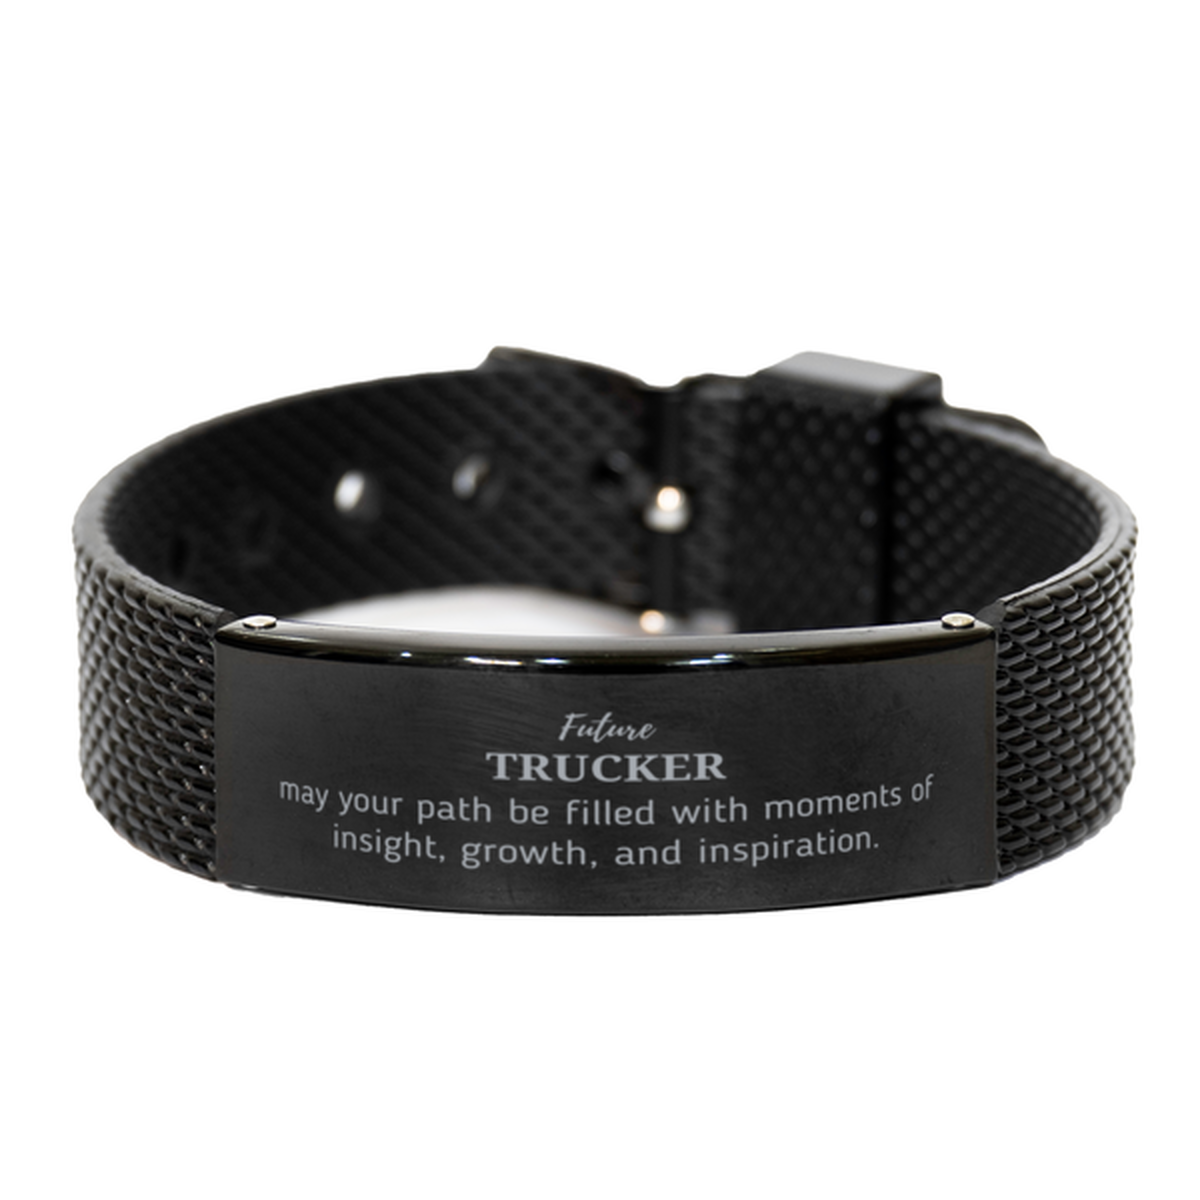 Future Trucker Gifts, May your path be filled with moments of insight, Graduation Gifts for New Trucker, Christmas Unique Black Shark Mesh Bracelet For Men, Women, Friends